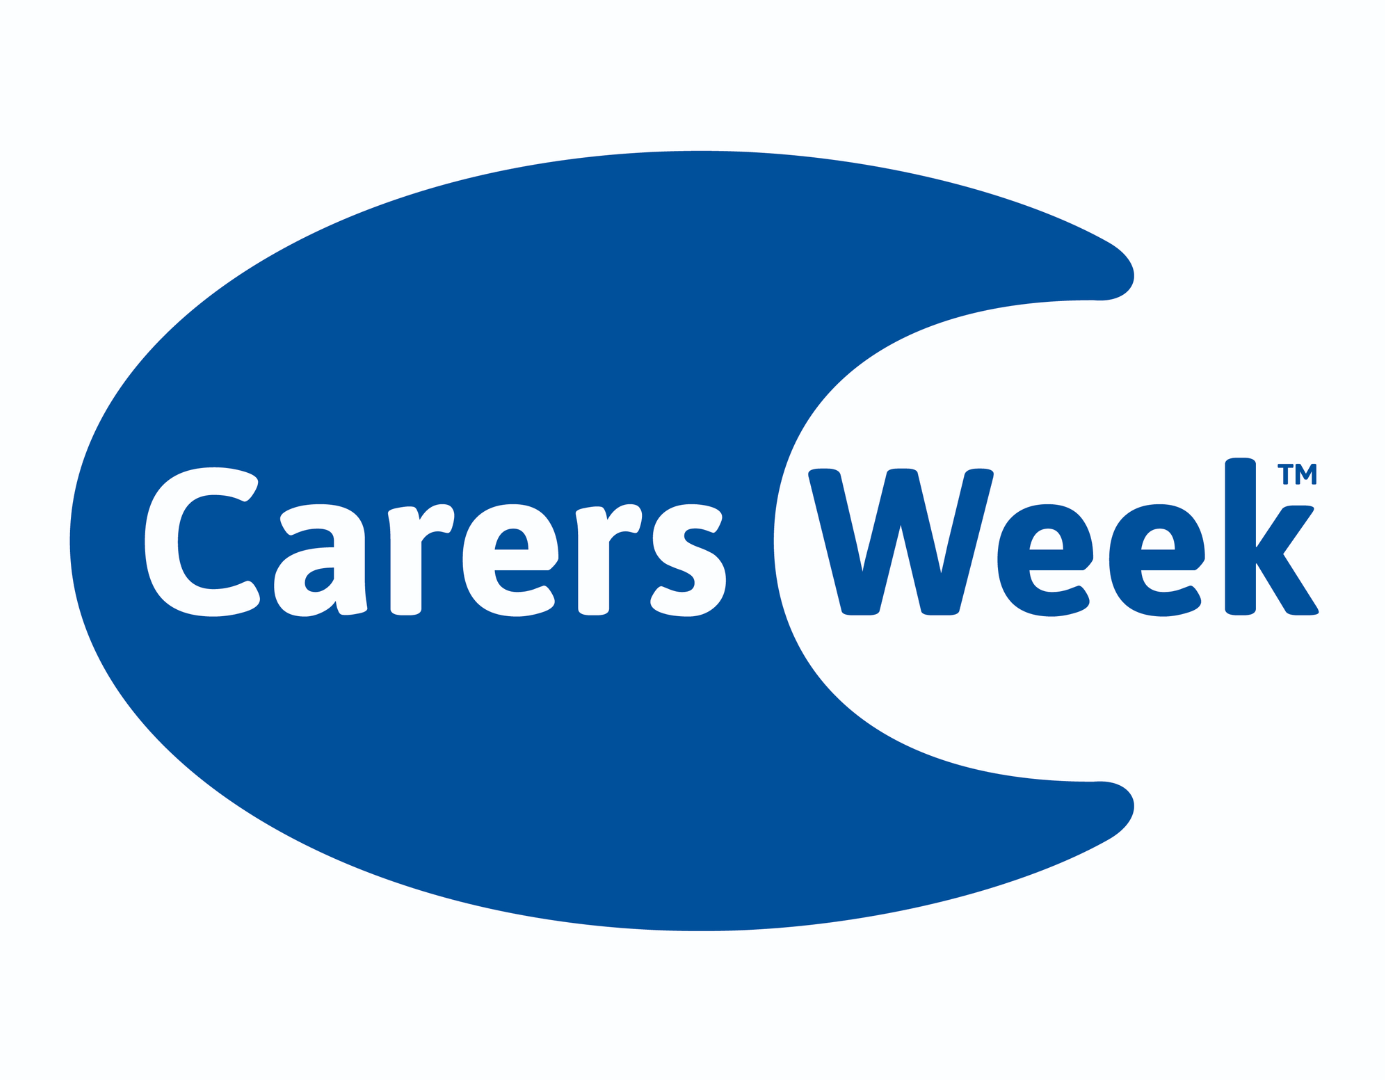 Blue crescent shape with 'Carers' inside it. 'Week' is outside of the crescent.